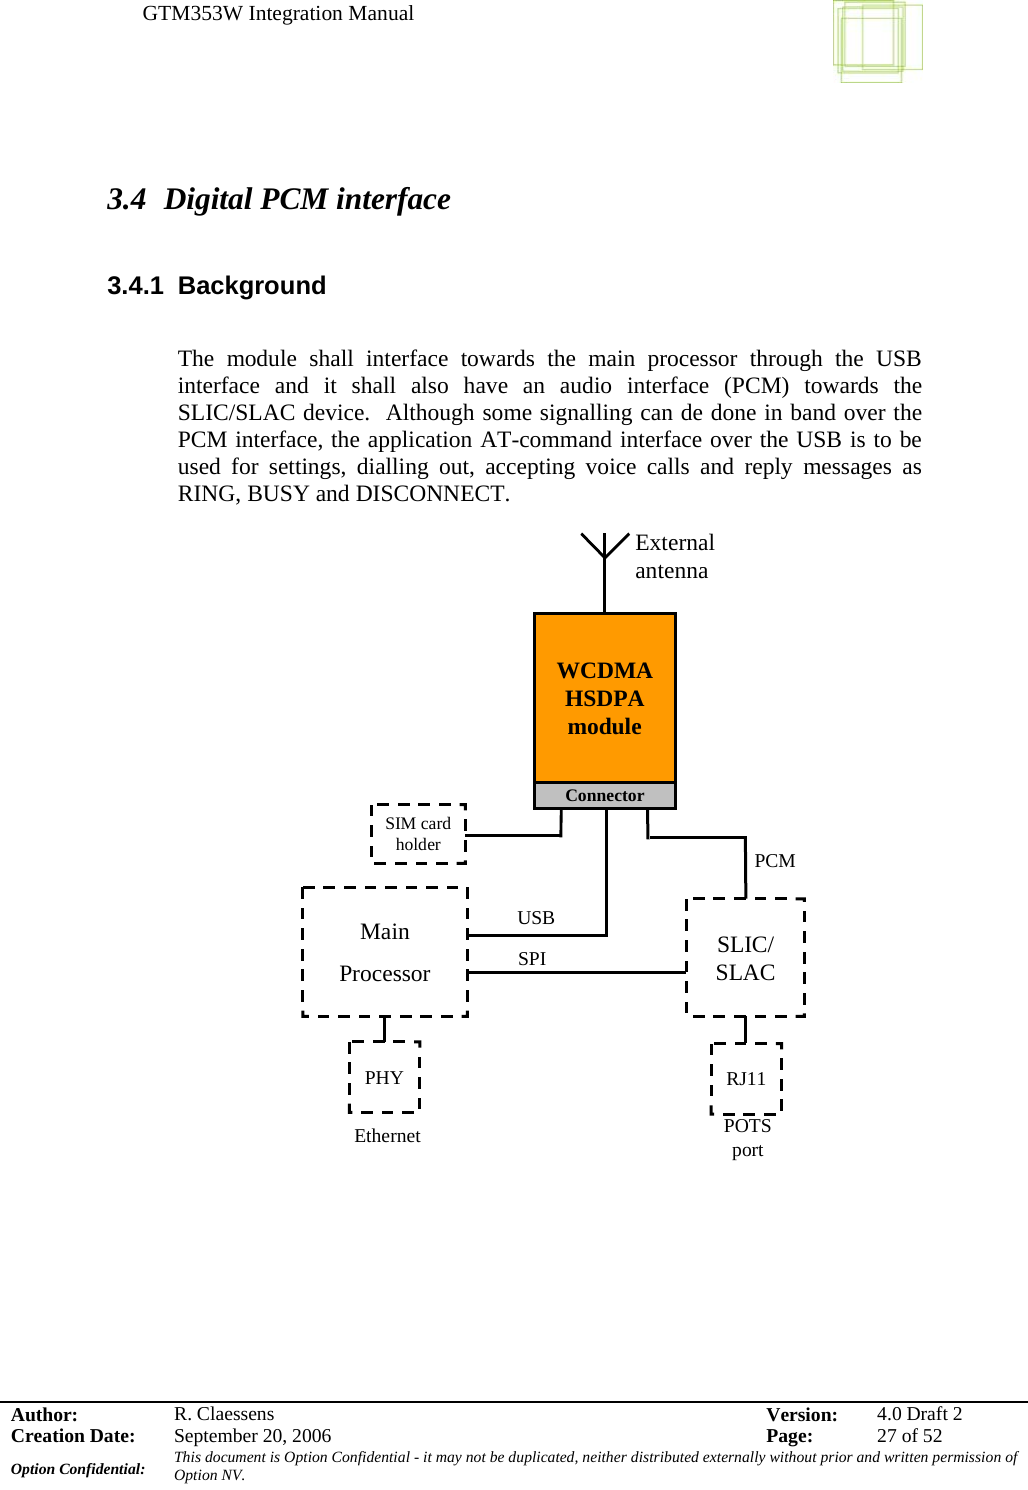 GTM353W Integration Manual      Author: R. Claessens  Version:  4.0 Draft 2Creation Date:  September 20, 2006  Page:  27 of 52 Option Confidential:  This document is Option Confidential - it may not be duplicated, neither distributed externally without prior and written permission of Option NV.     3.4 Digital PCM interface  3.4.1 Background  The module shall interface towards the main processor through the USB interface and it shall also have an audio interface (PCM) towards the SLIC/SLAC device.  Although some signalling can de done in band over the PCM interface, the application AT-command interface over the USB is to be used for settings, dialling out, accepting voice calls and reply messages as RING, BUSY and DISCONNECT.        Main ProcessorUSB SLIC/ SLACRJ11SPIPOTS portWCDMAHSDPA moduleSIM card holderExternal antennaPCMPHYEthernetConnector